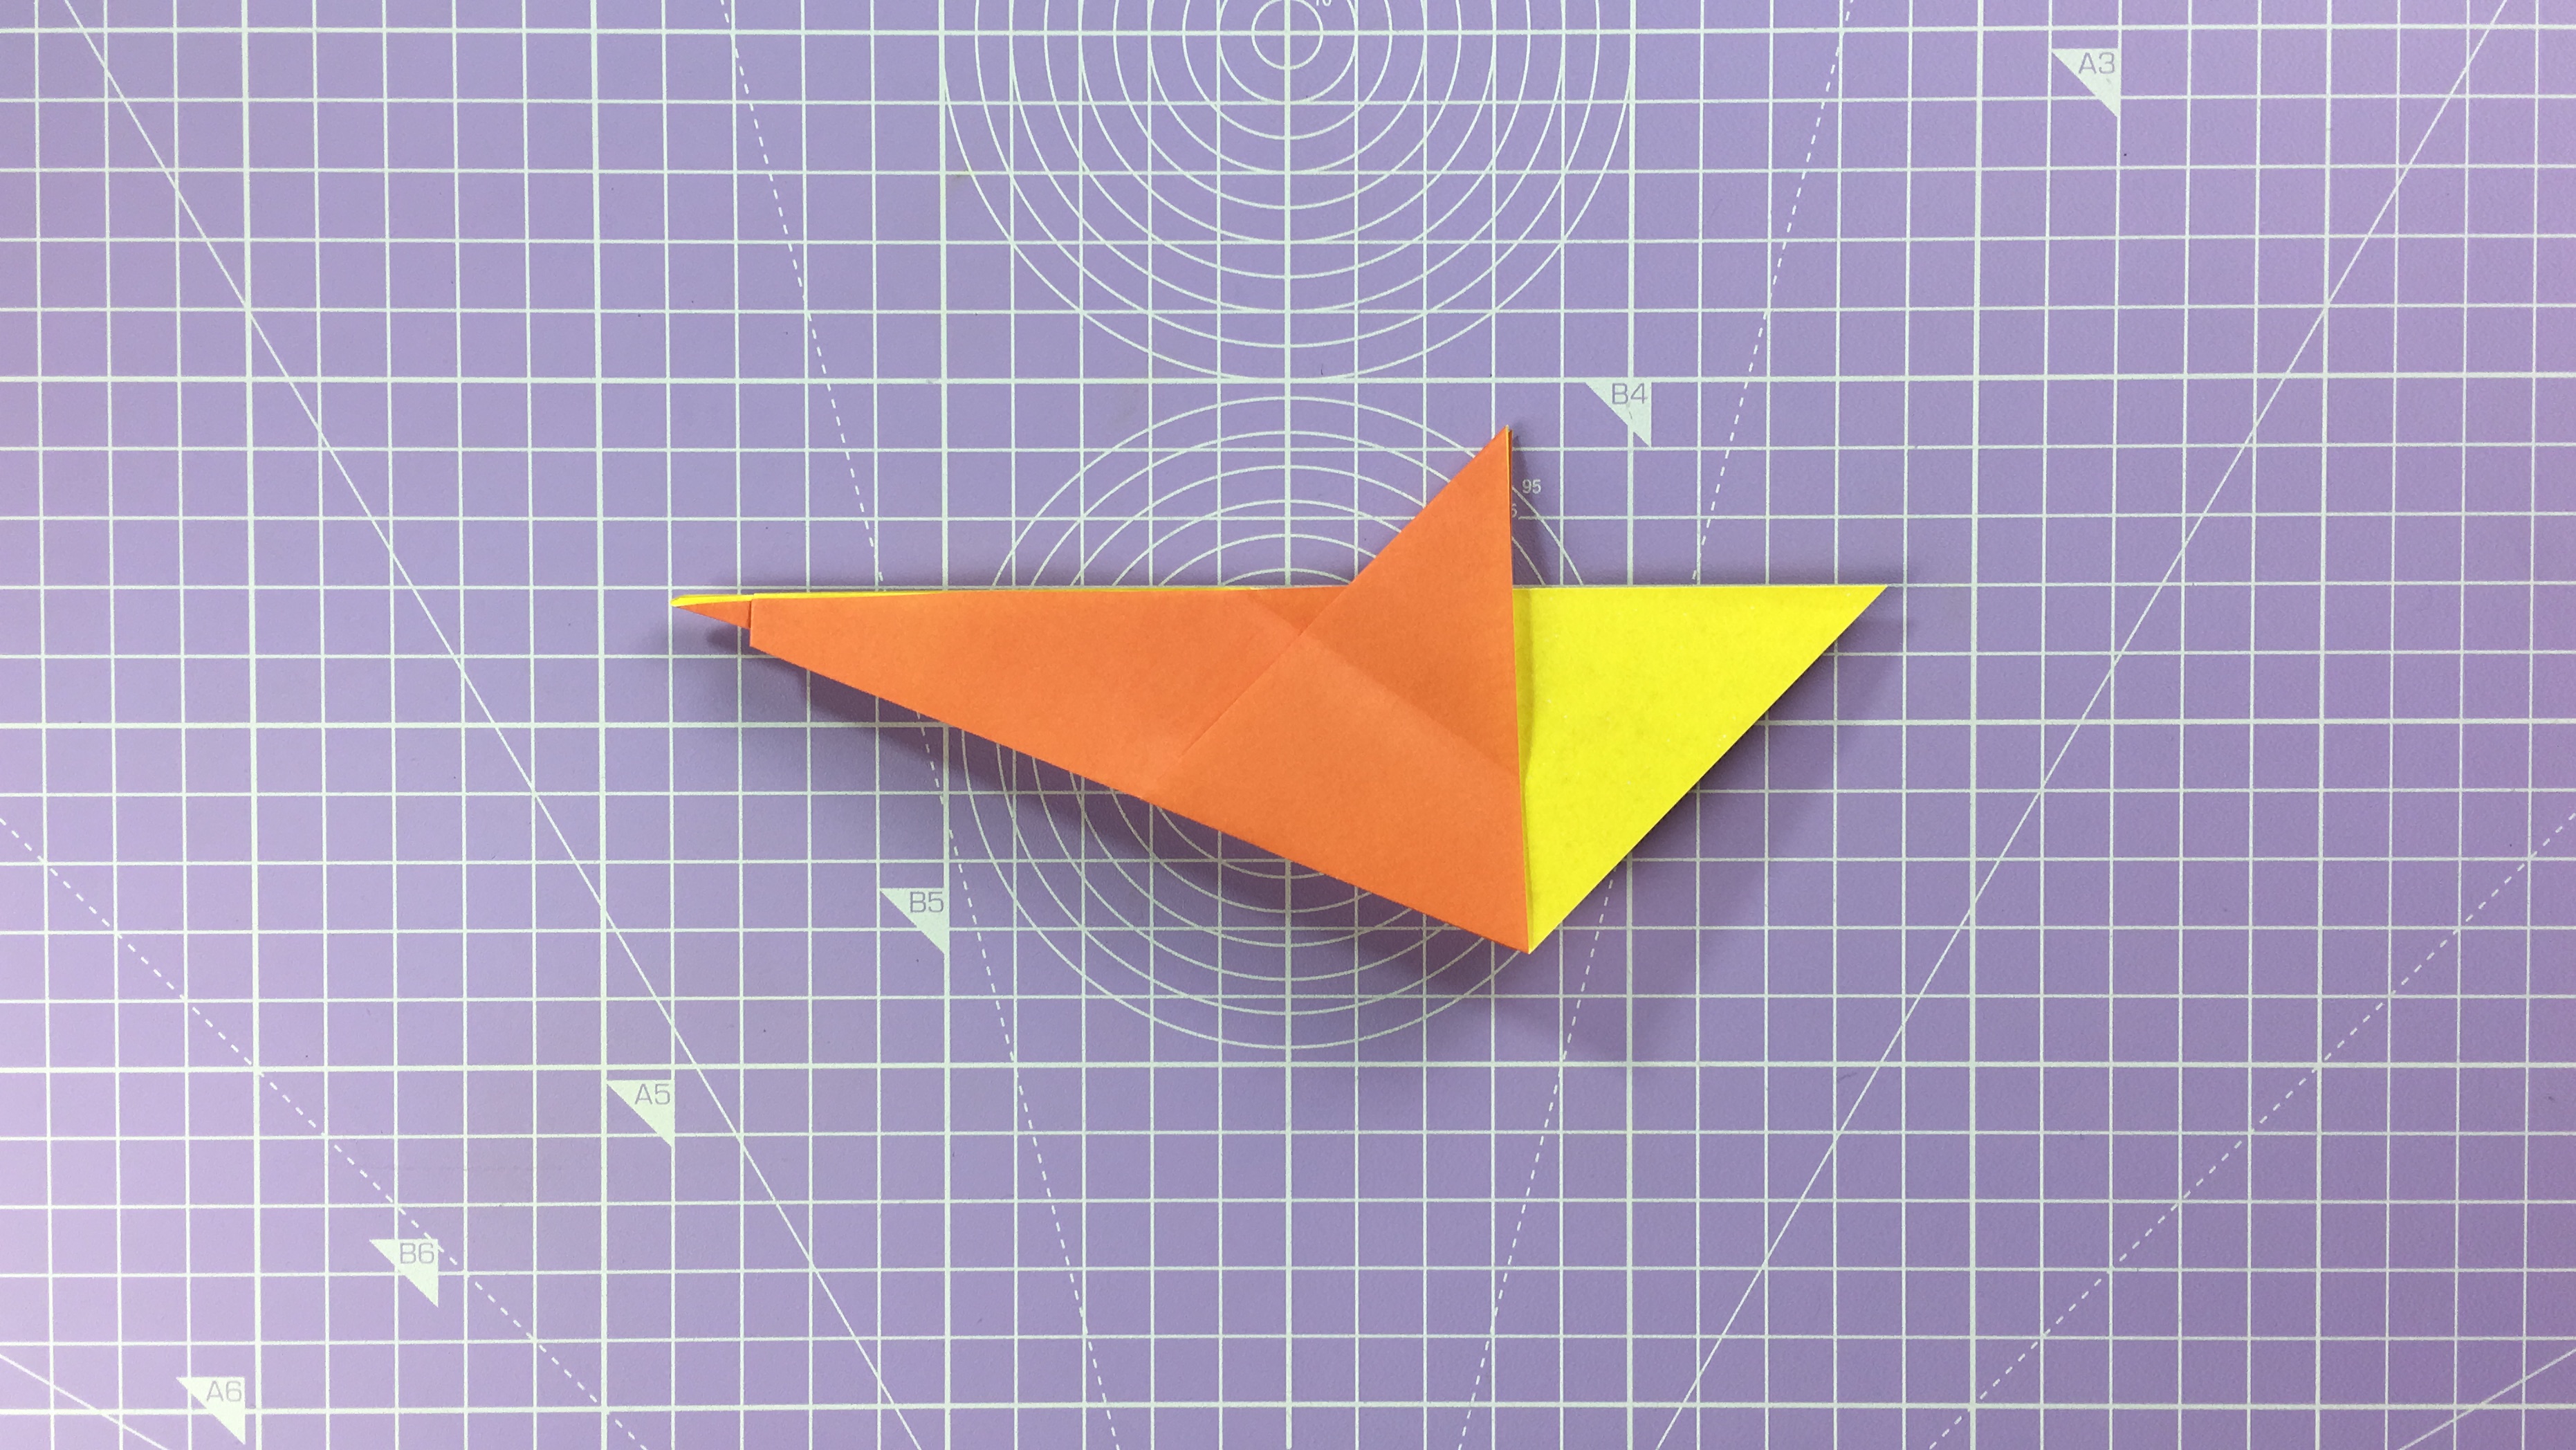 How to make an origami duck - step 11b